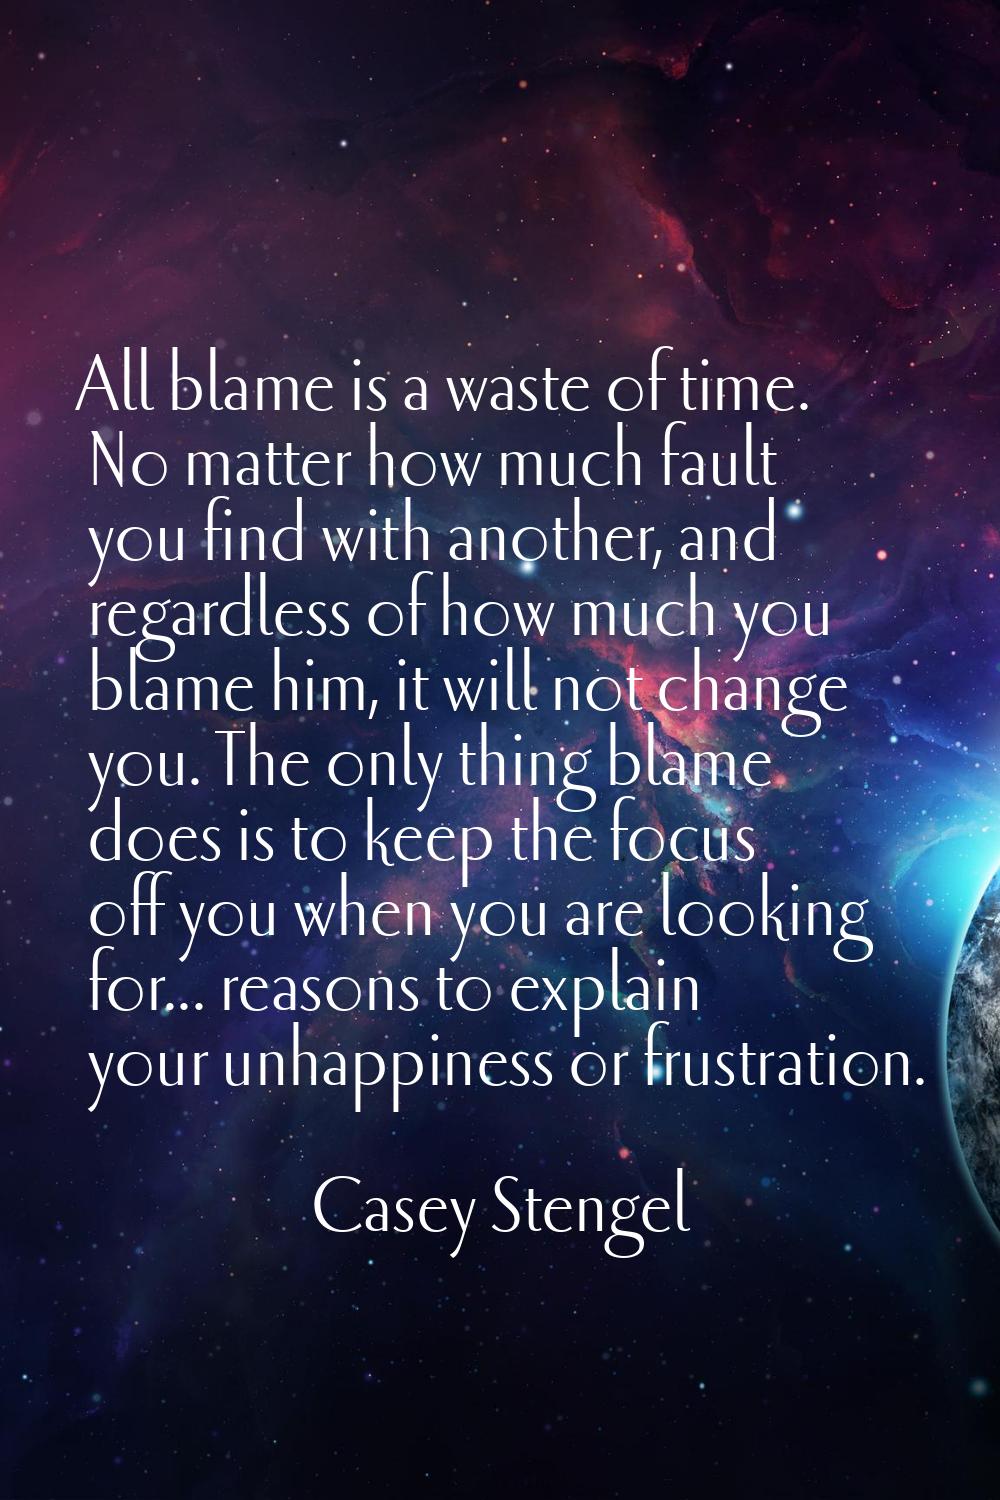 All blame is a waste of time. No matter how much fault you find with another, and regardless of how